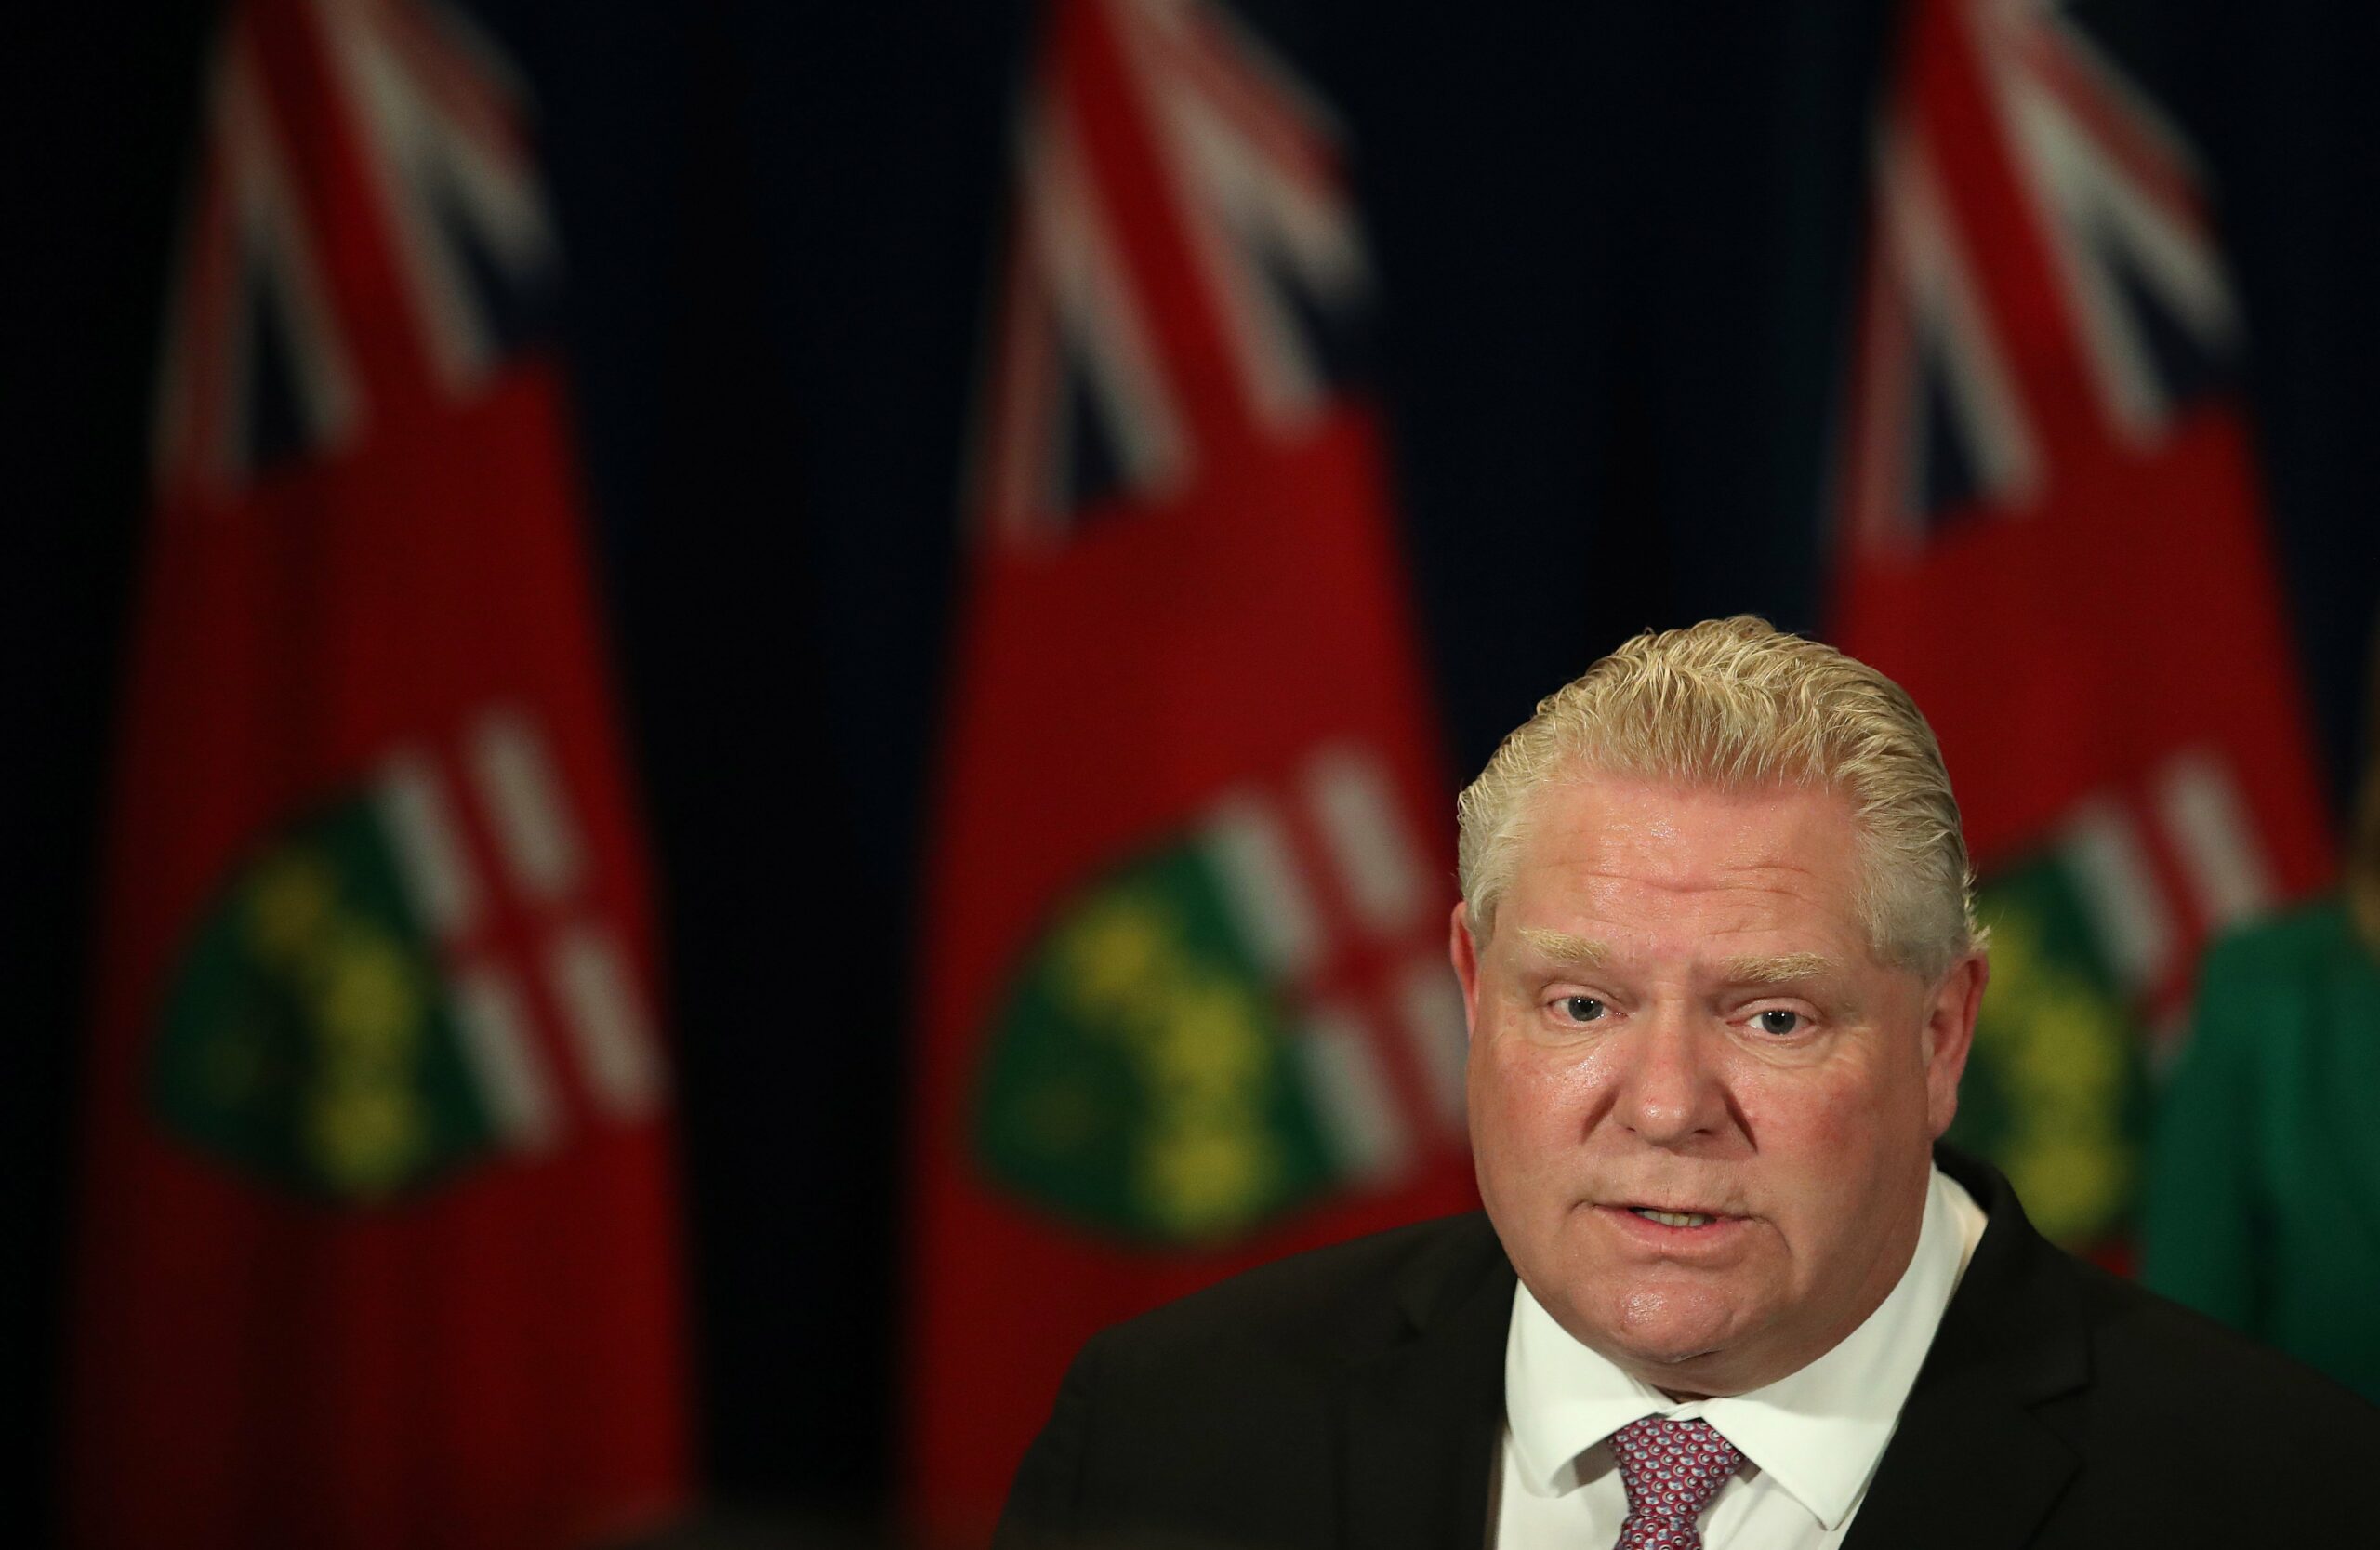 Premier Ford: 'I get it' if parents don't want to vaccinate kids